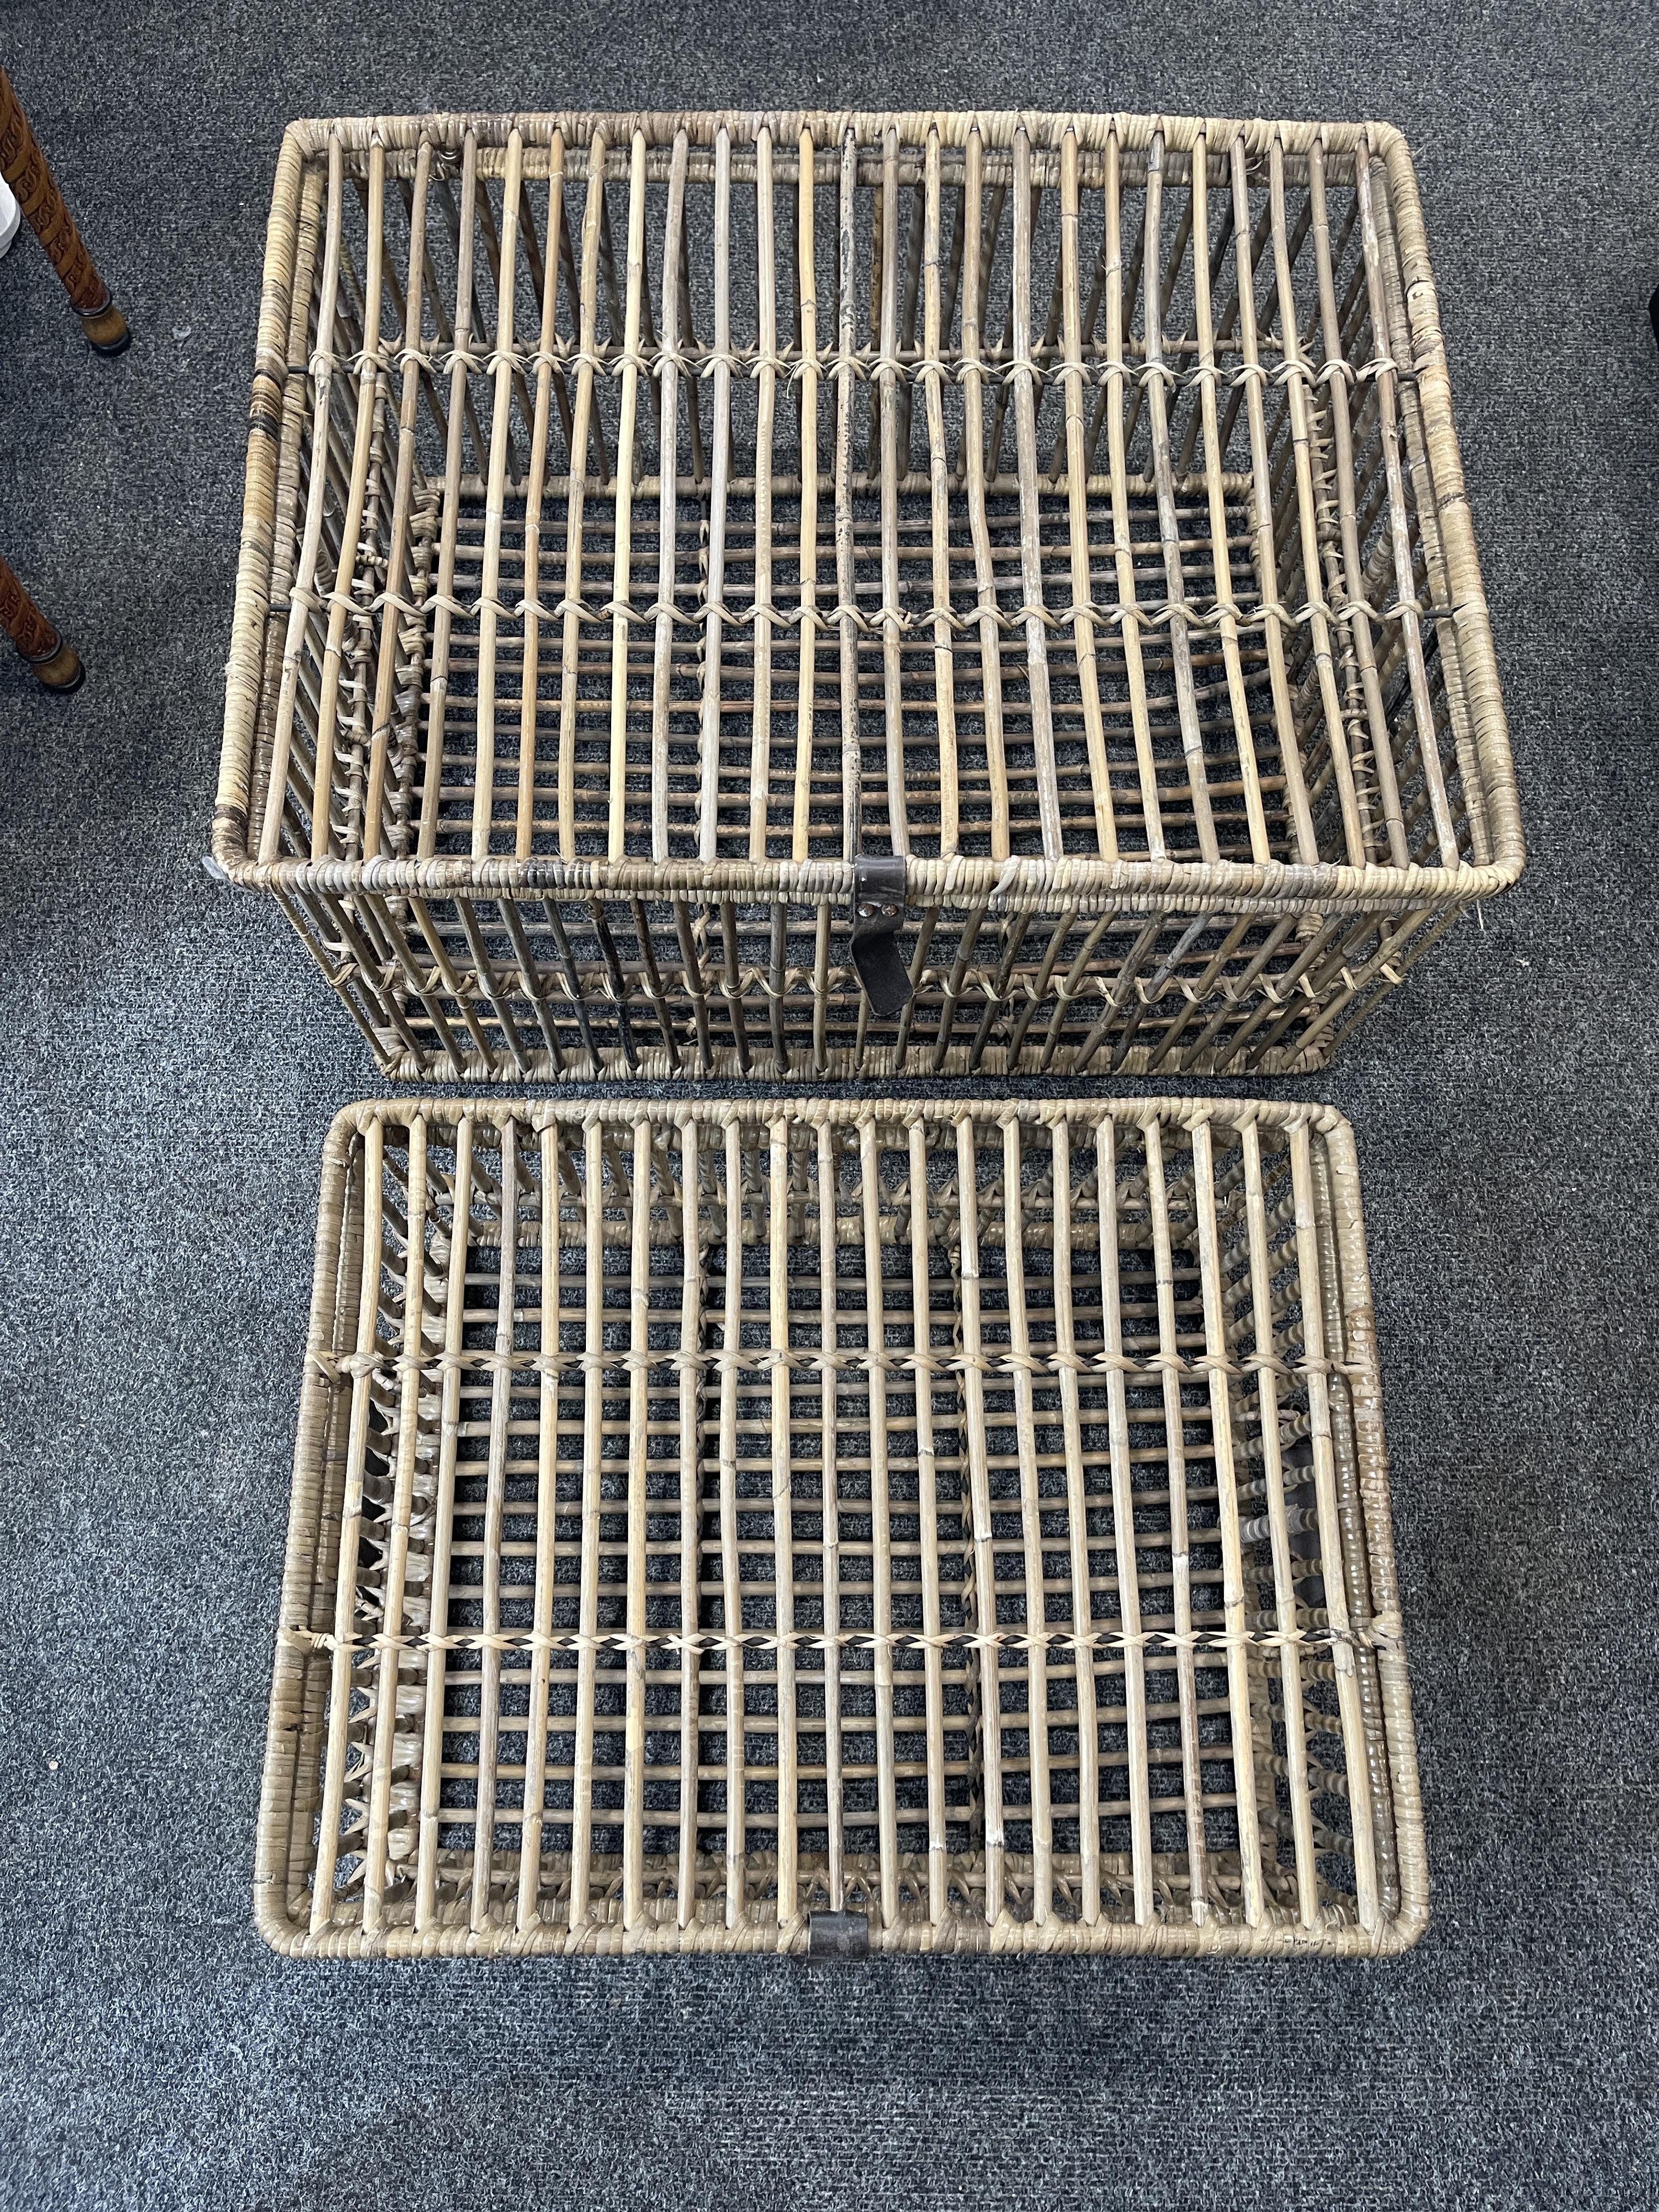 Two Large Vintage Rattan Trunks.